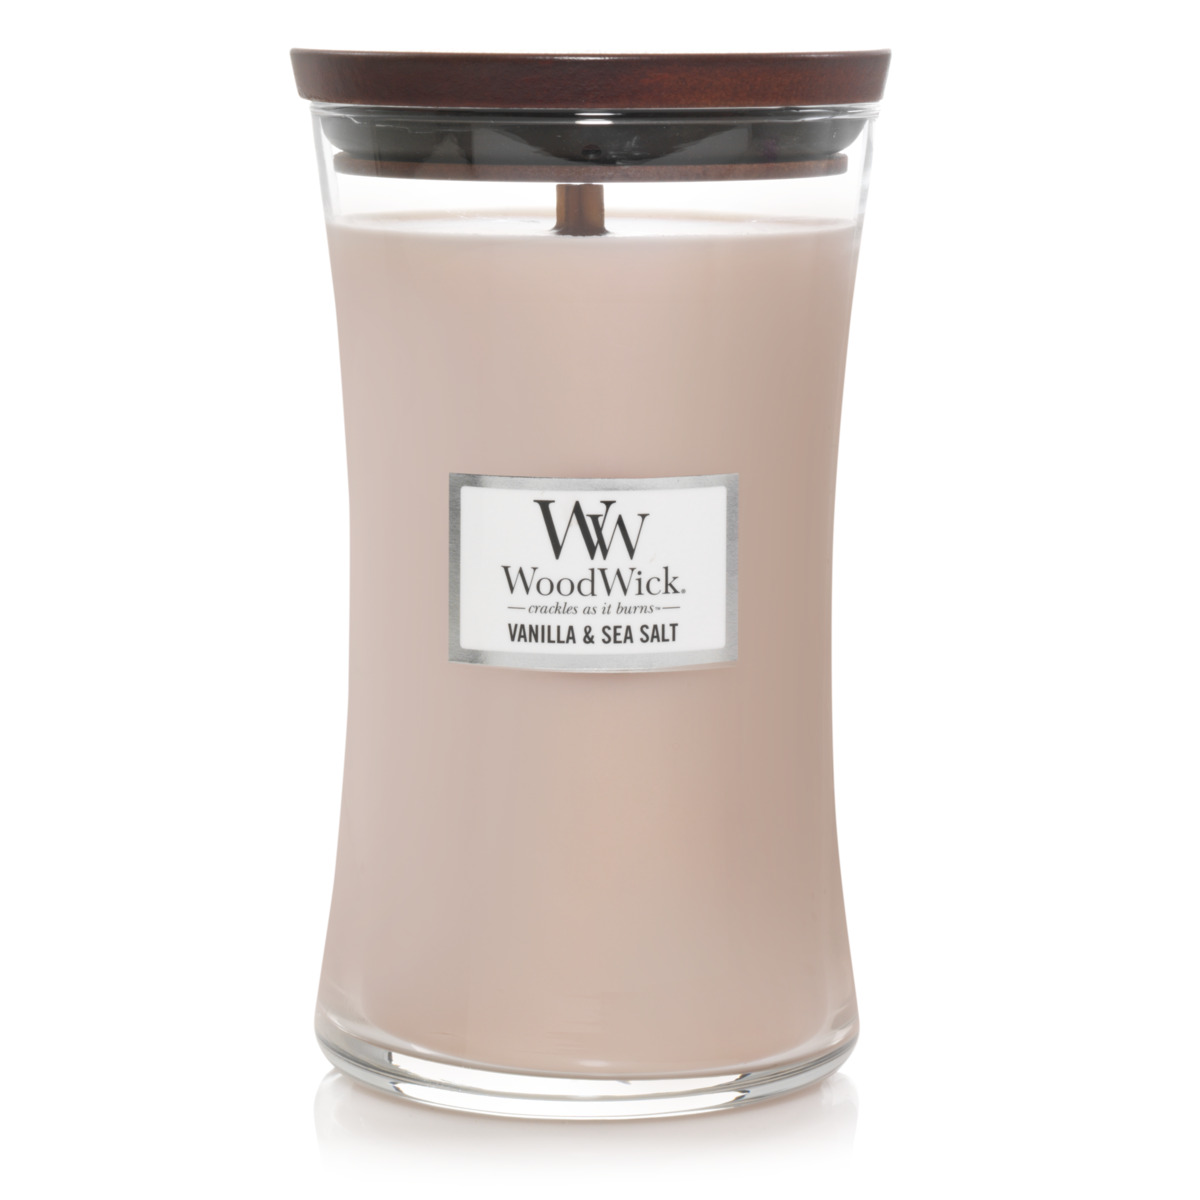 WoodWick Vanilla & Sea Salt, Scented Candle, Classic Hourglass Jar, Large 7-inch, 21.5 Ounce - image 1 of 5